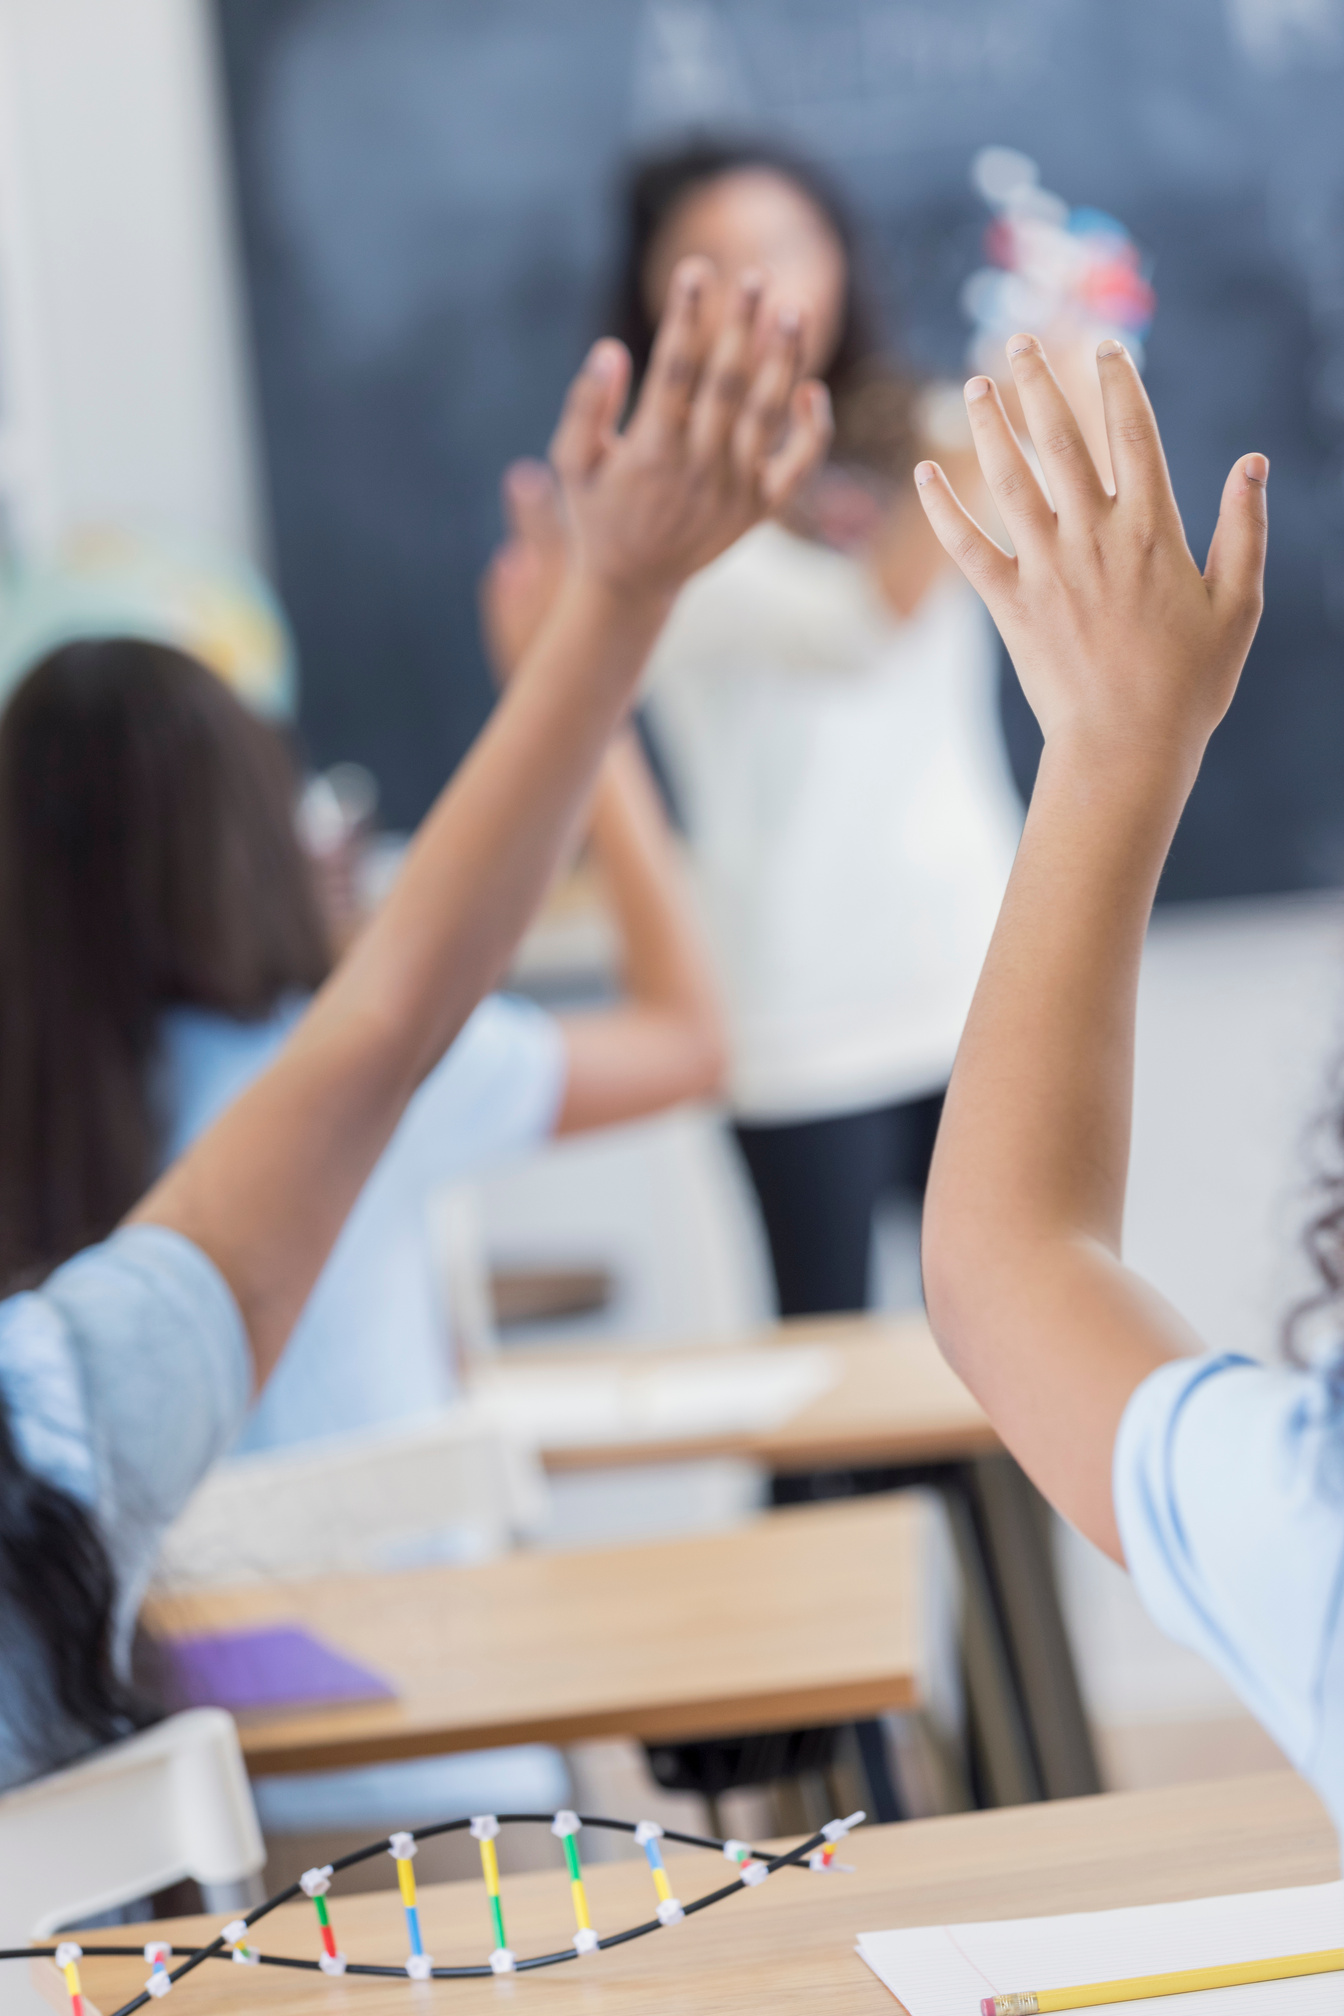 Middle school students raise their hands during class